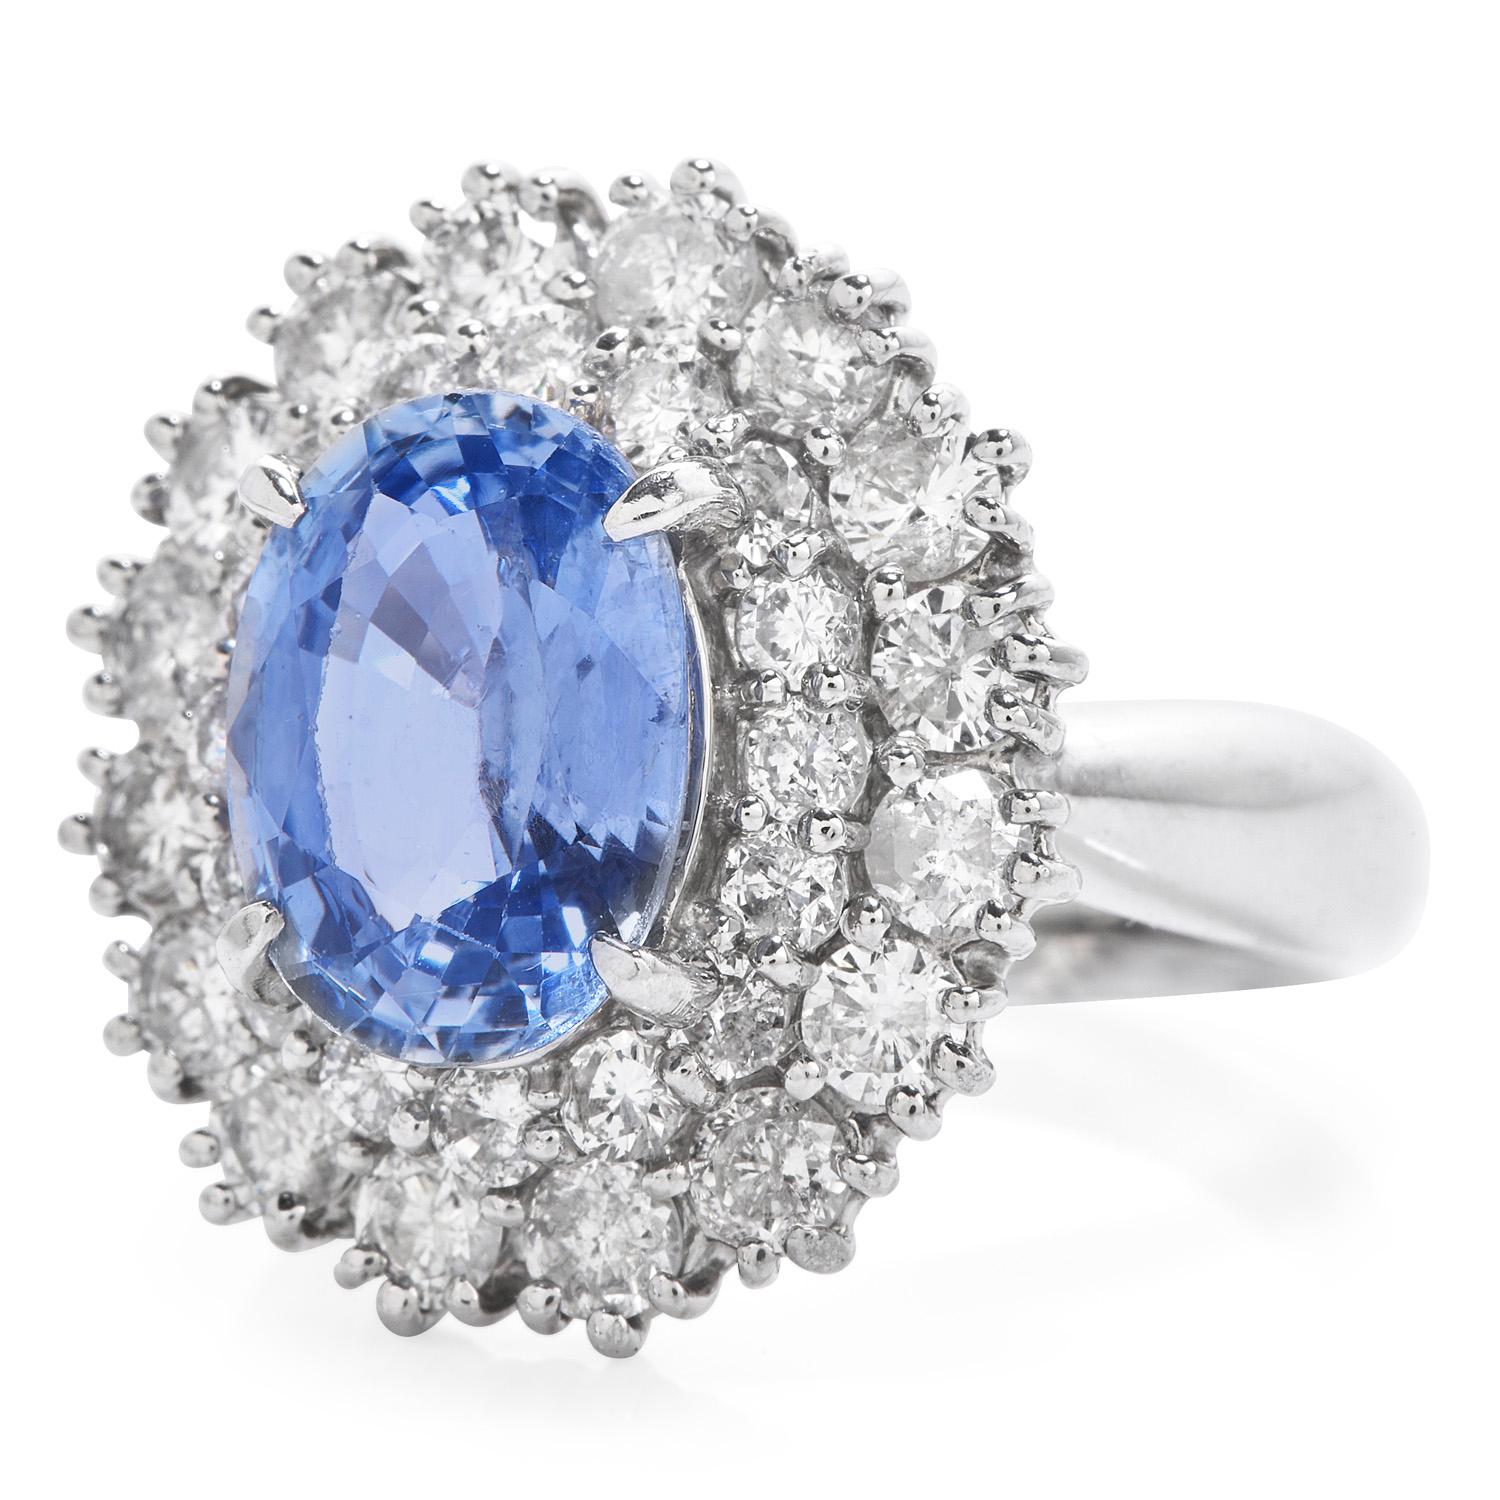 If you adore the enchanting color of blue sapphires and admired the late Princess Diana’s engagement ring, you will love this GIA Diamond & Natural corundum platinum double Halo Ring! 

The amazingly transparent genuine blue sapphire weighing approx